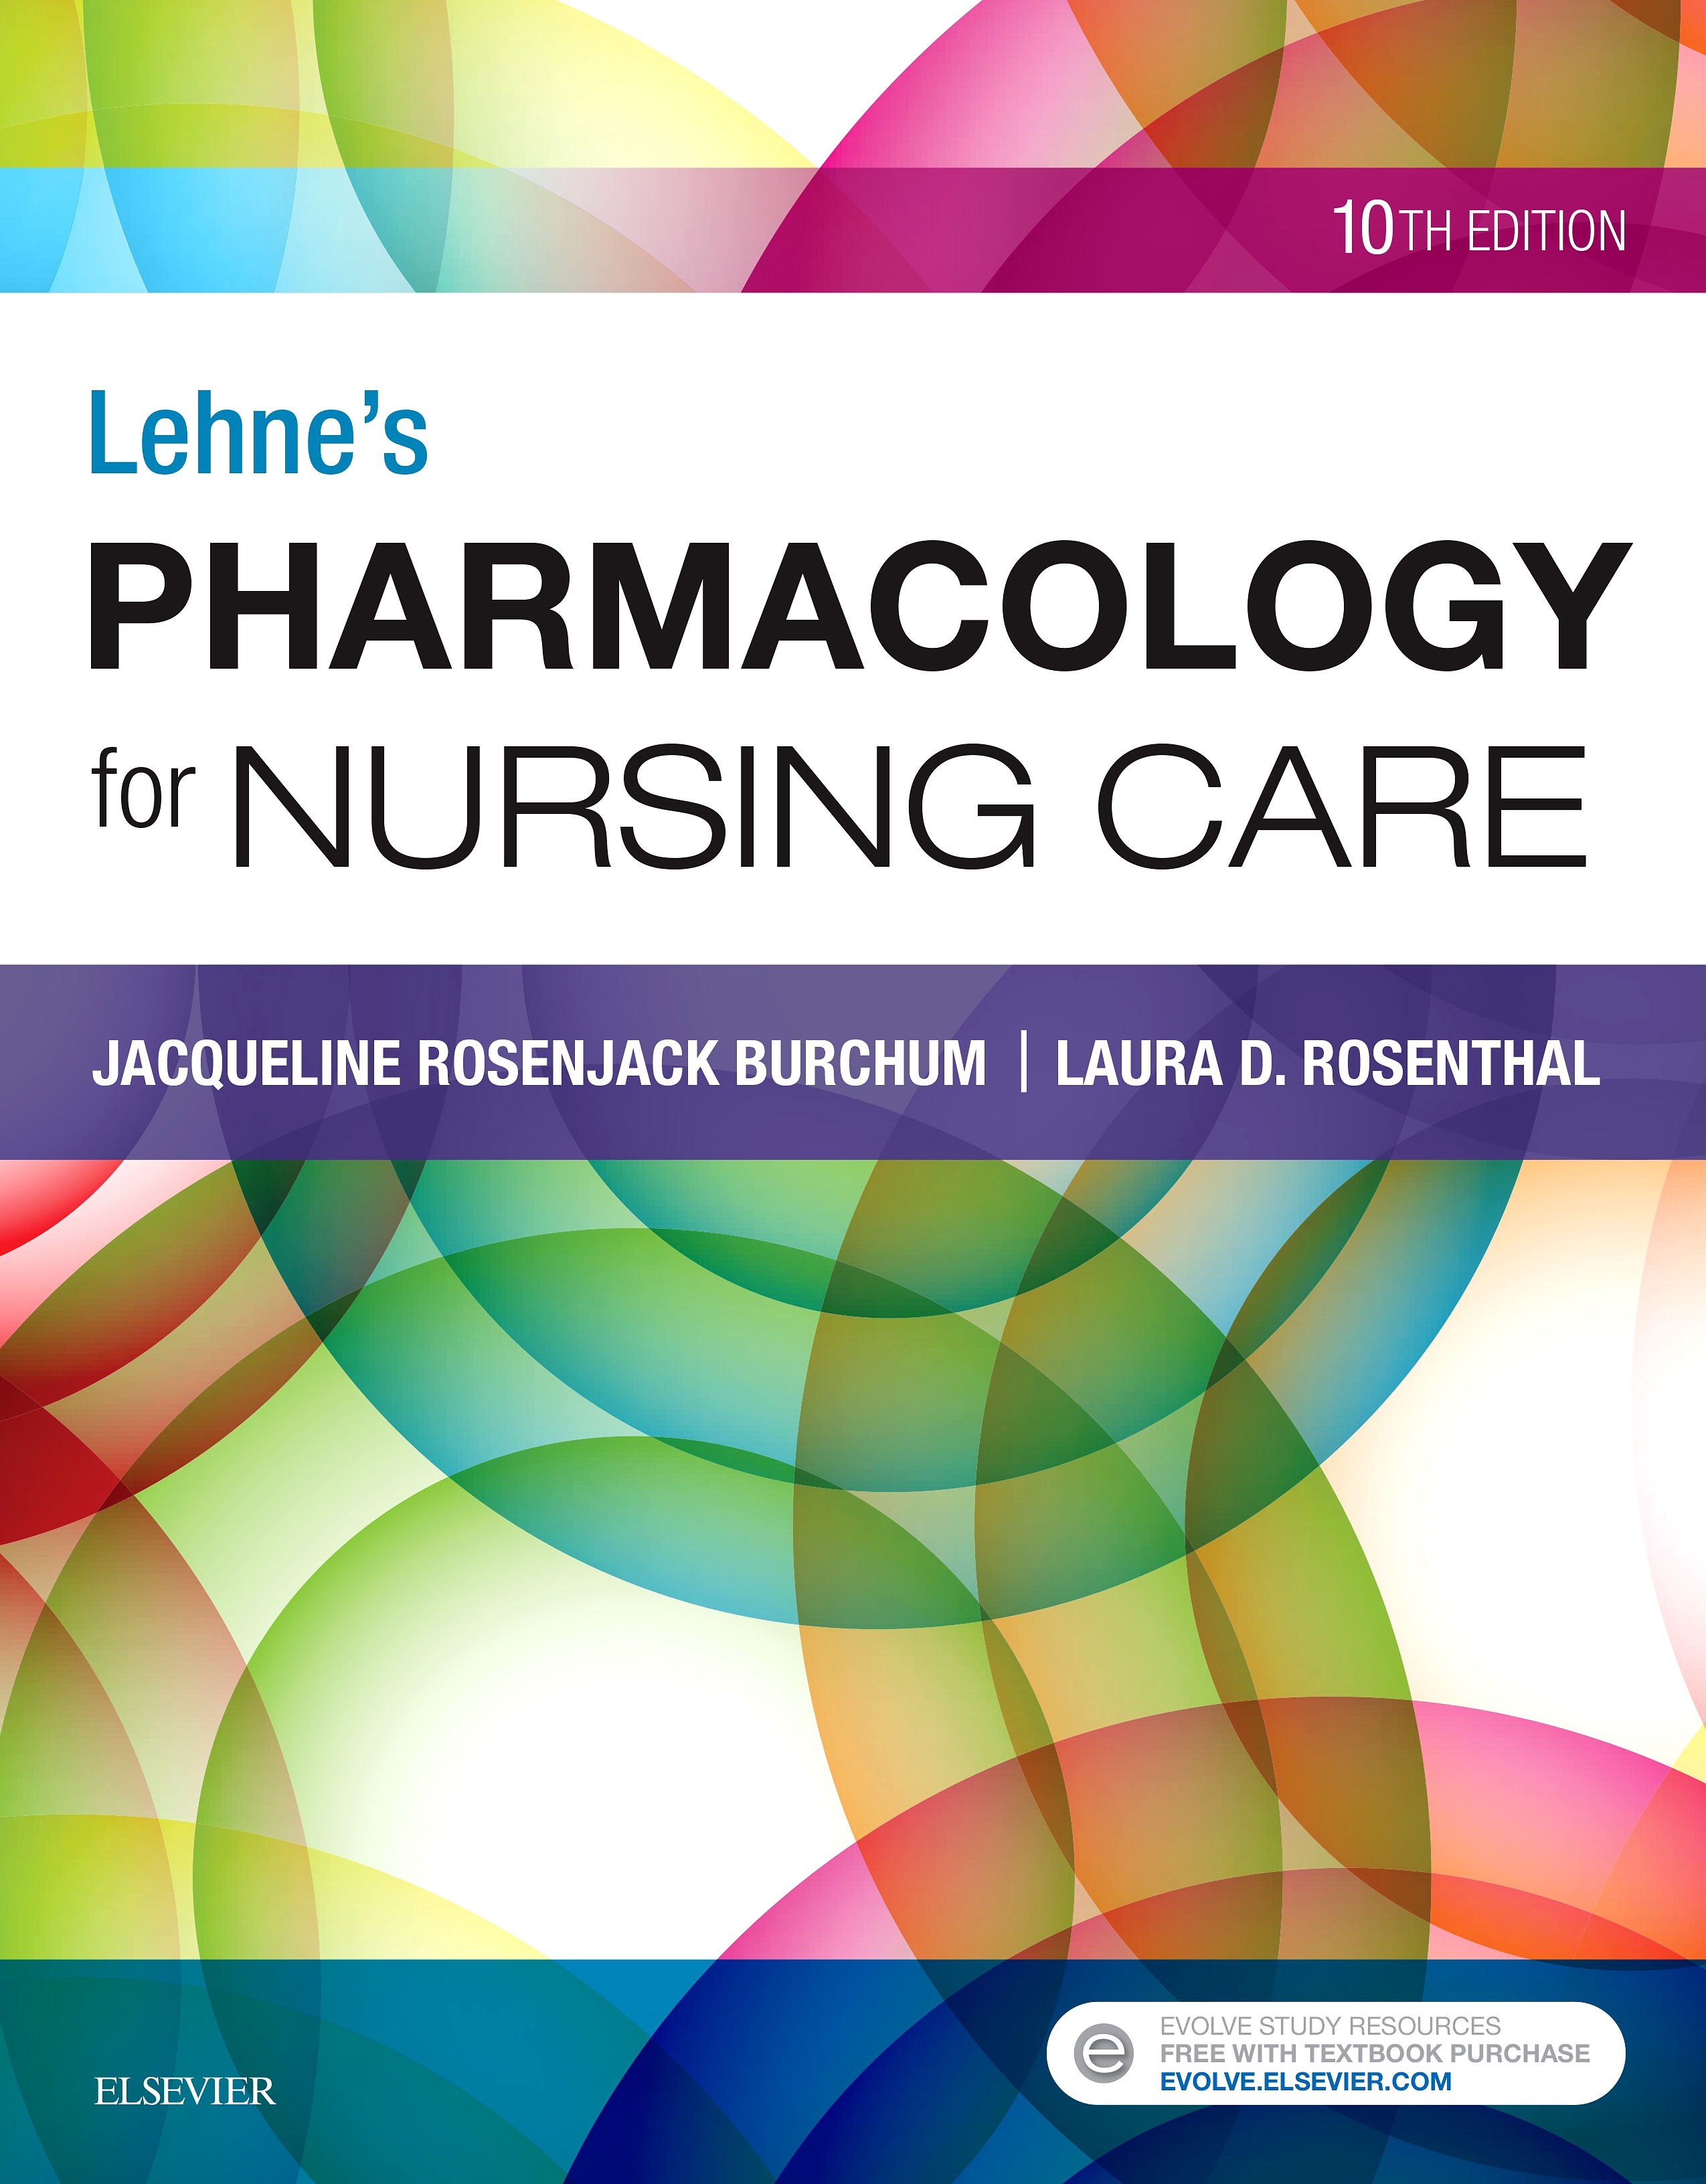 Evolve Resources for Lehne's Pharmacology for Nursing Care, 10th Edition